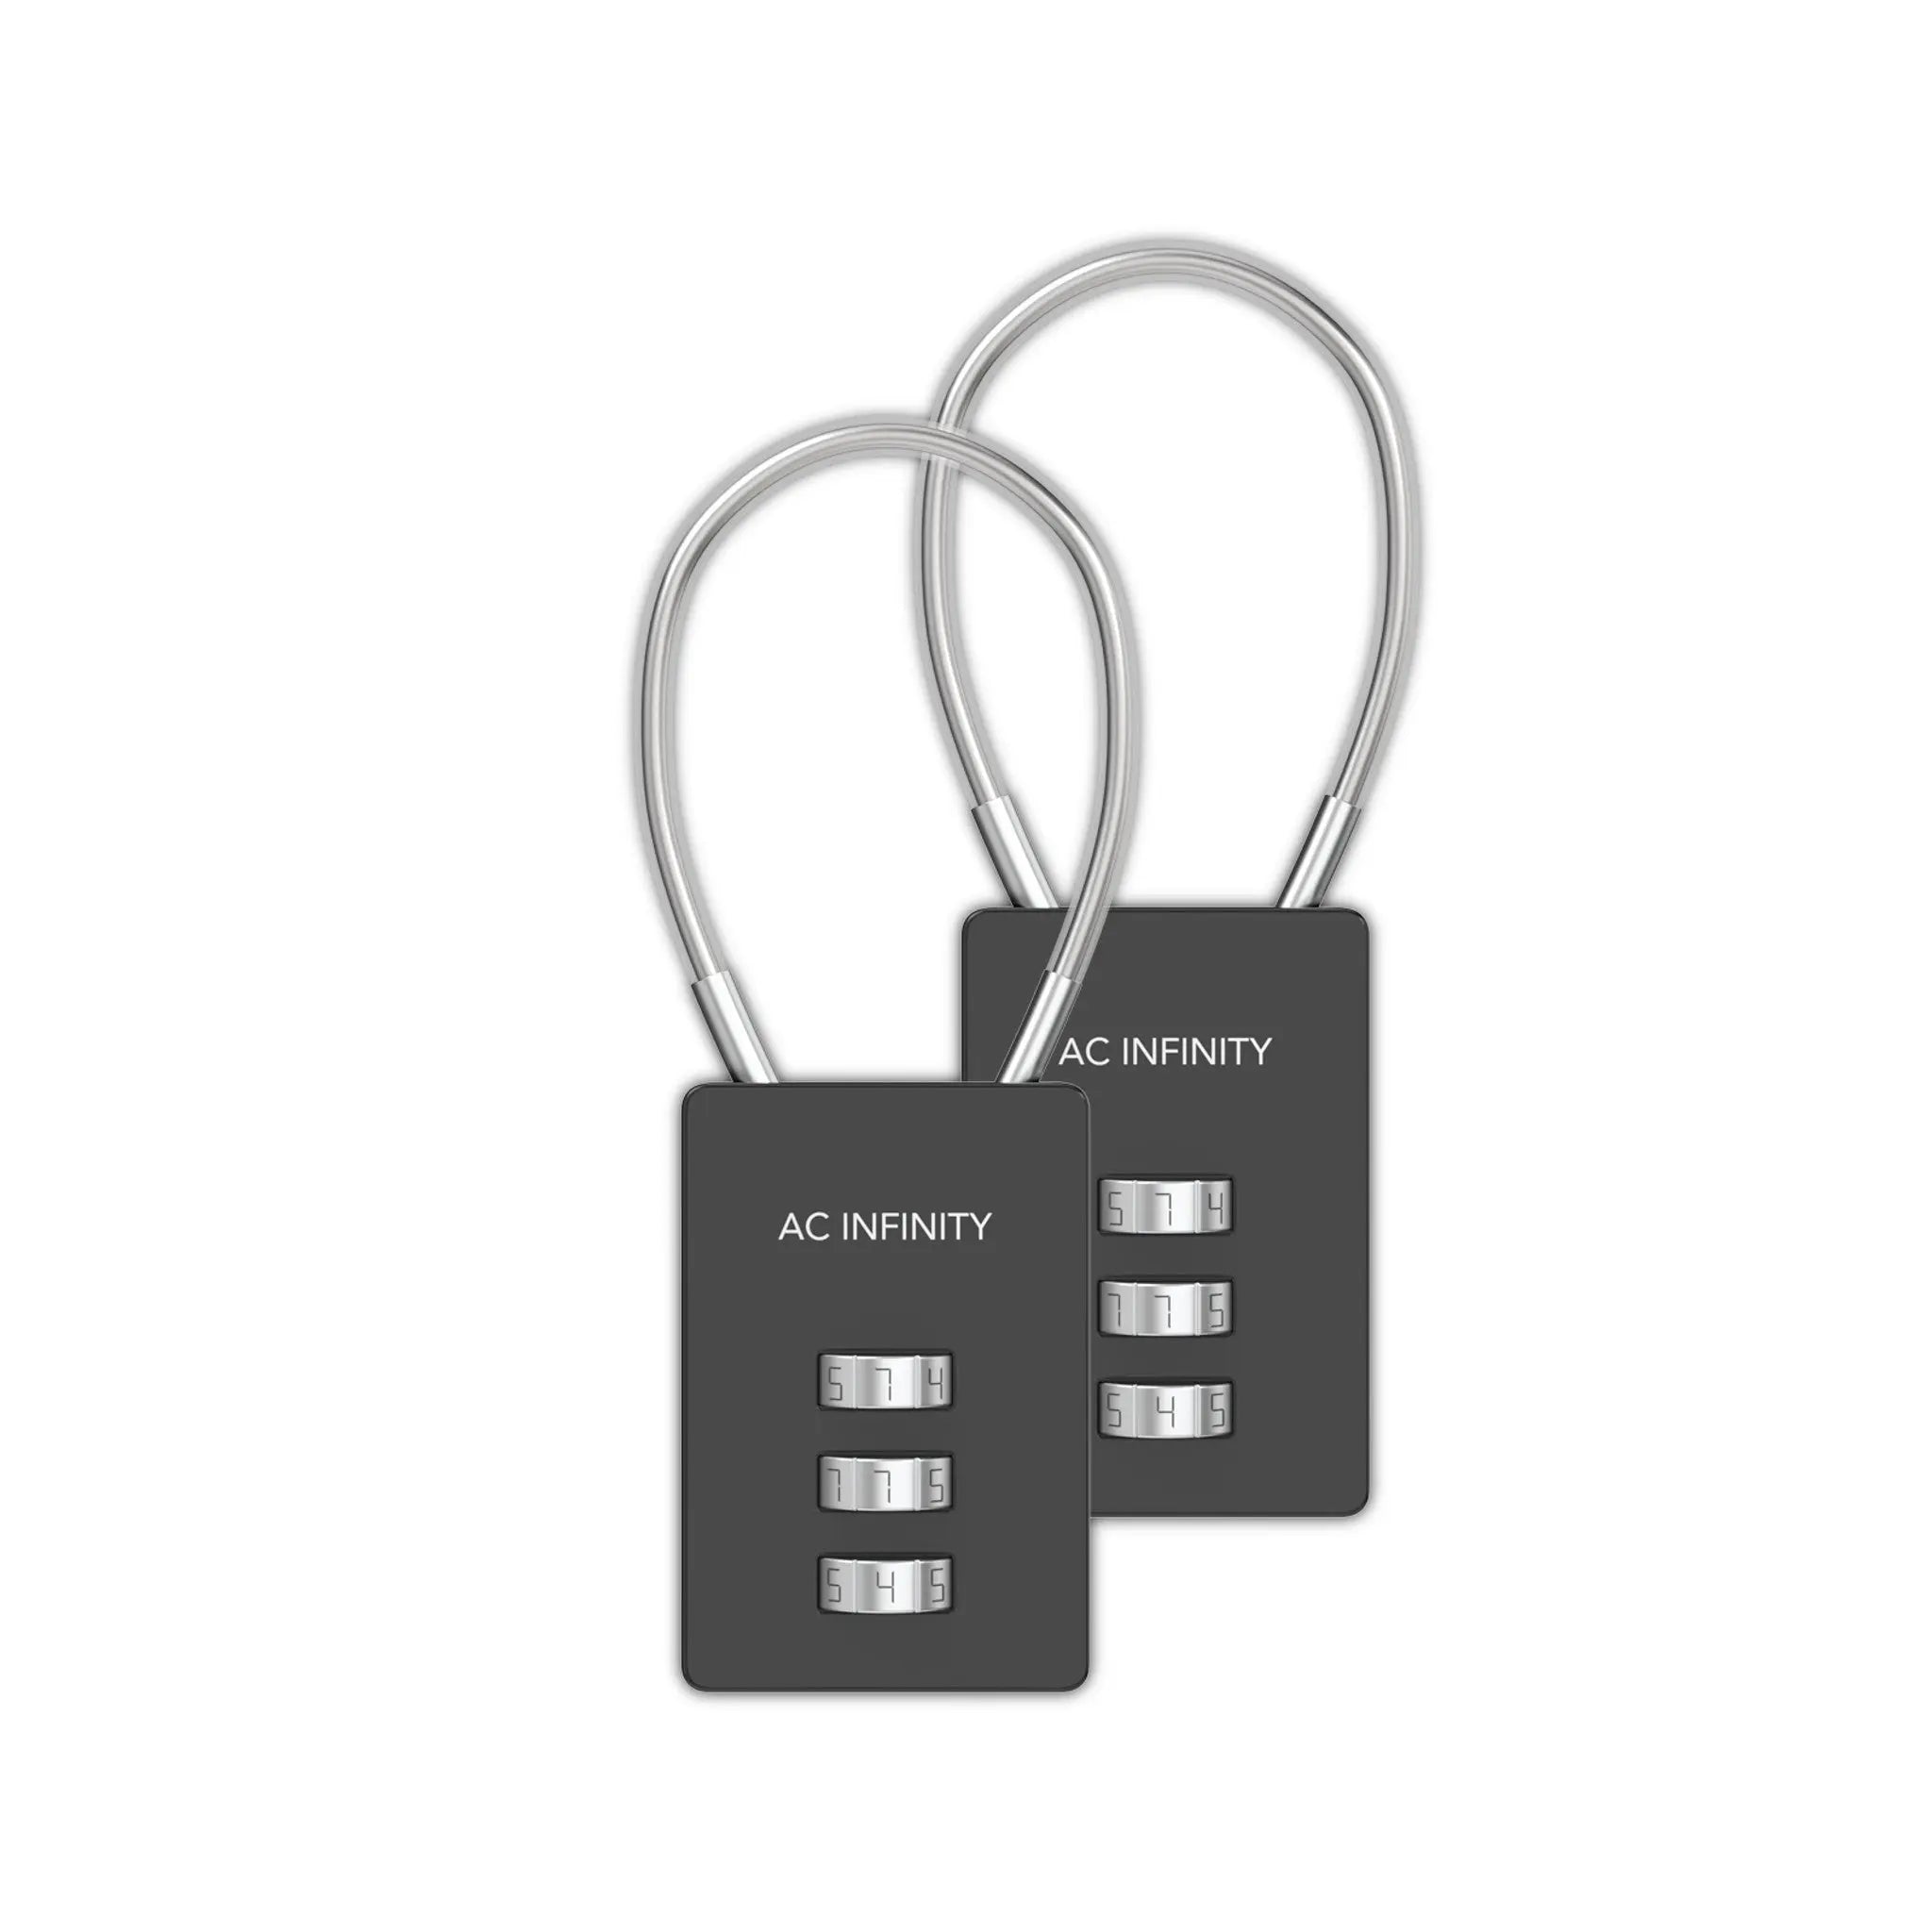 AC Infinity UIS Lighting Adapter Type-A for RJ11/12 Connector Lights with PWM or 0-10V Dimmers